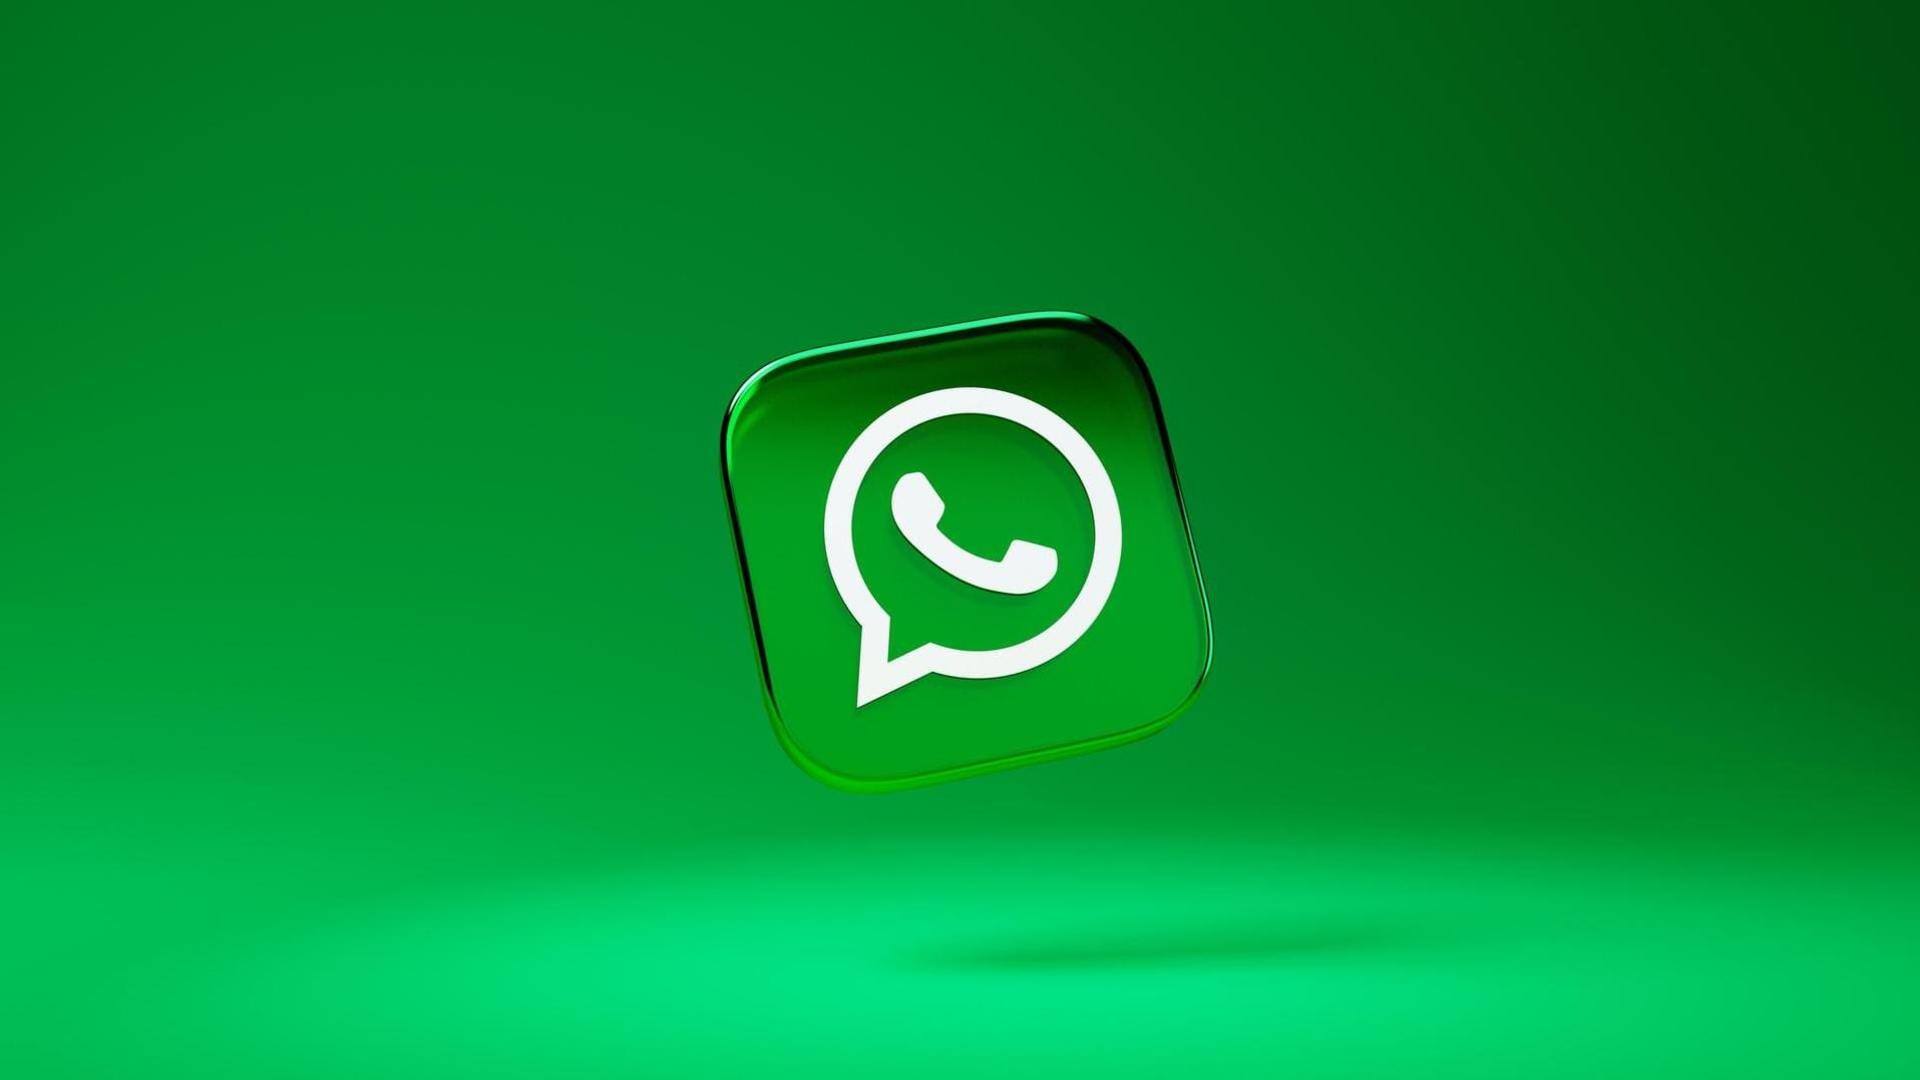 WhatsApp users can now edit sent messages within 15 minutes